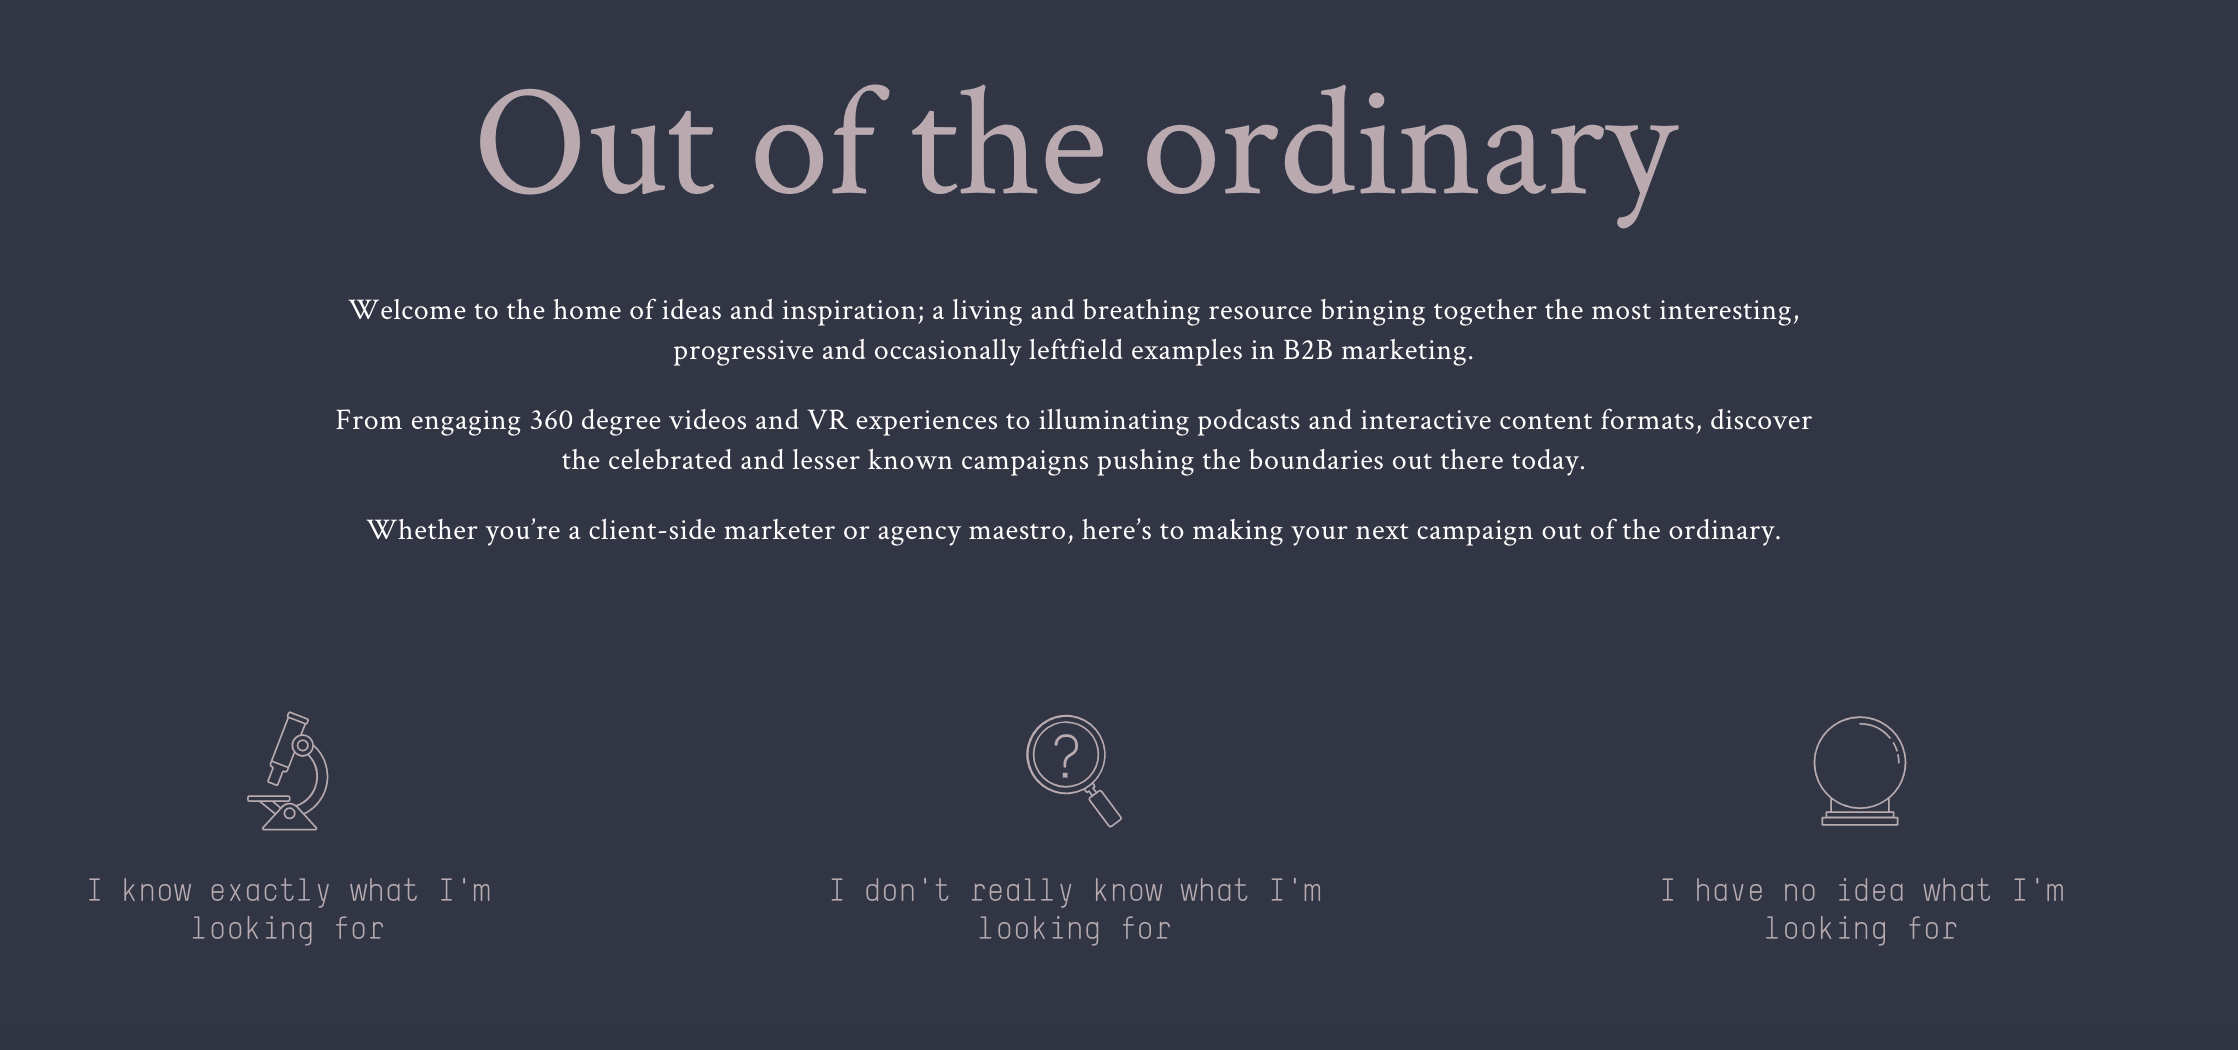 Screenshot of the 'Out of the Ordinary' website – an online B2B marketing resource from Earnest